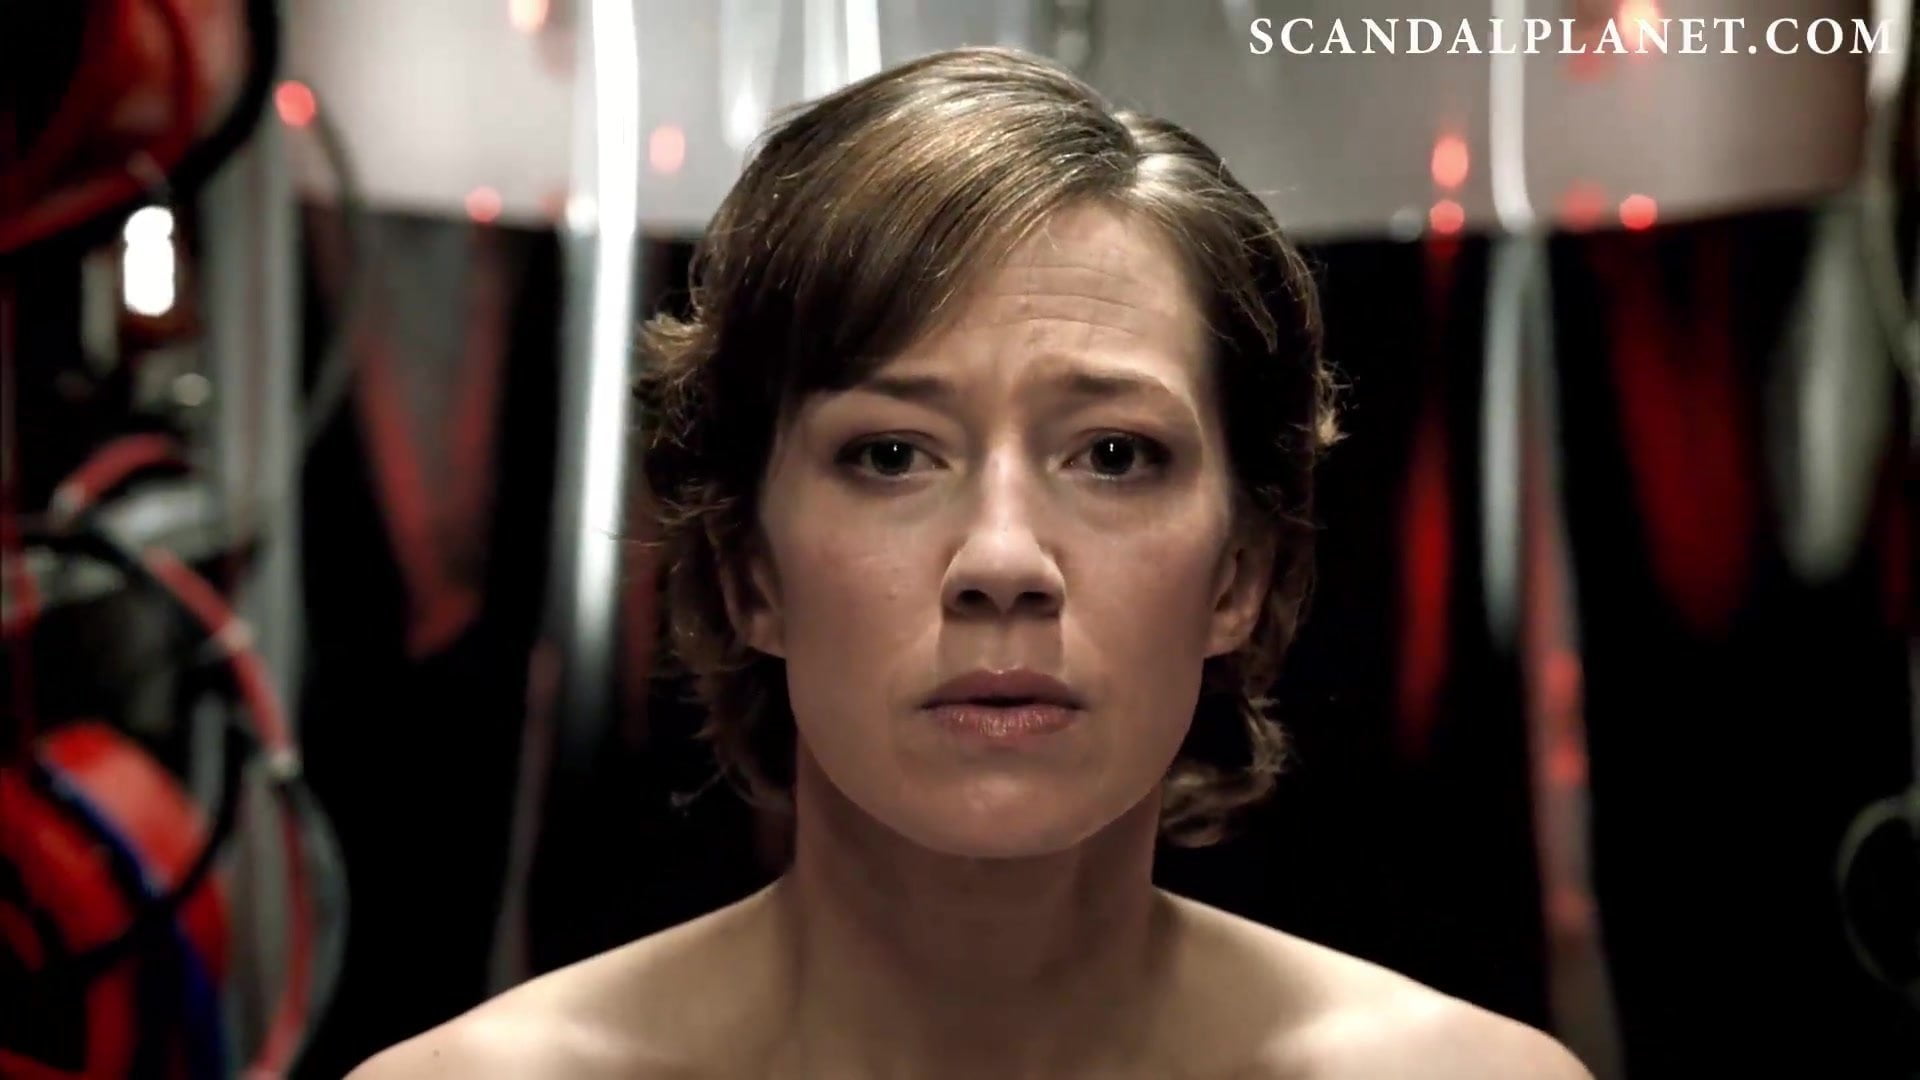 Carrie coon nude scene in the leftovers on scandalplanetcom - Schi coons ca...